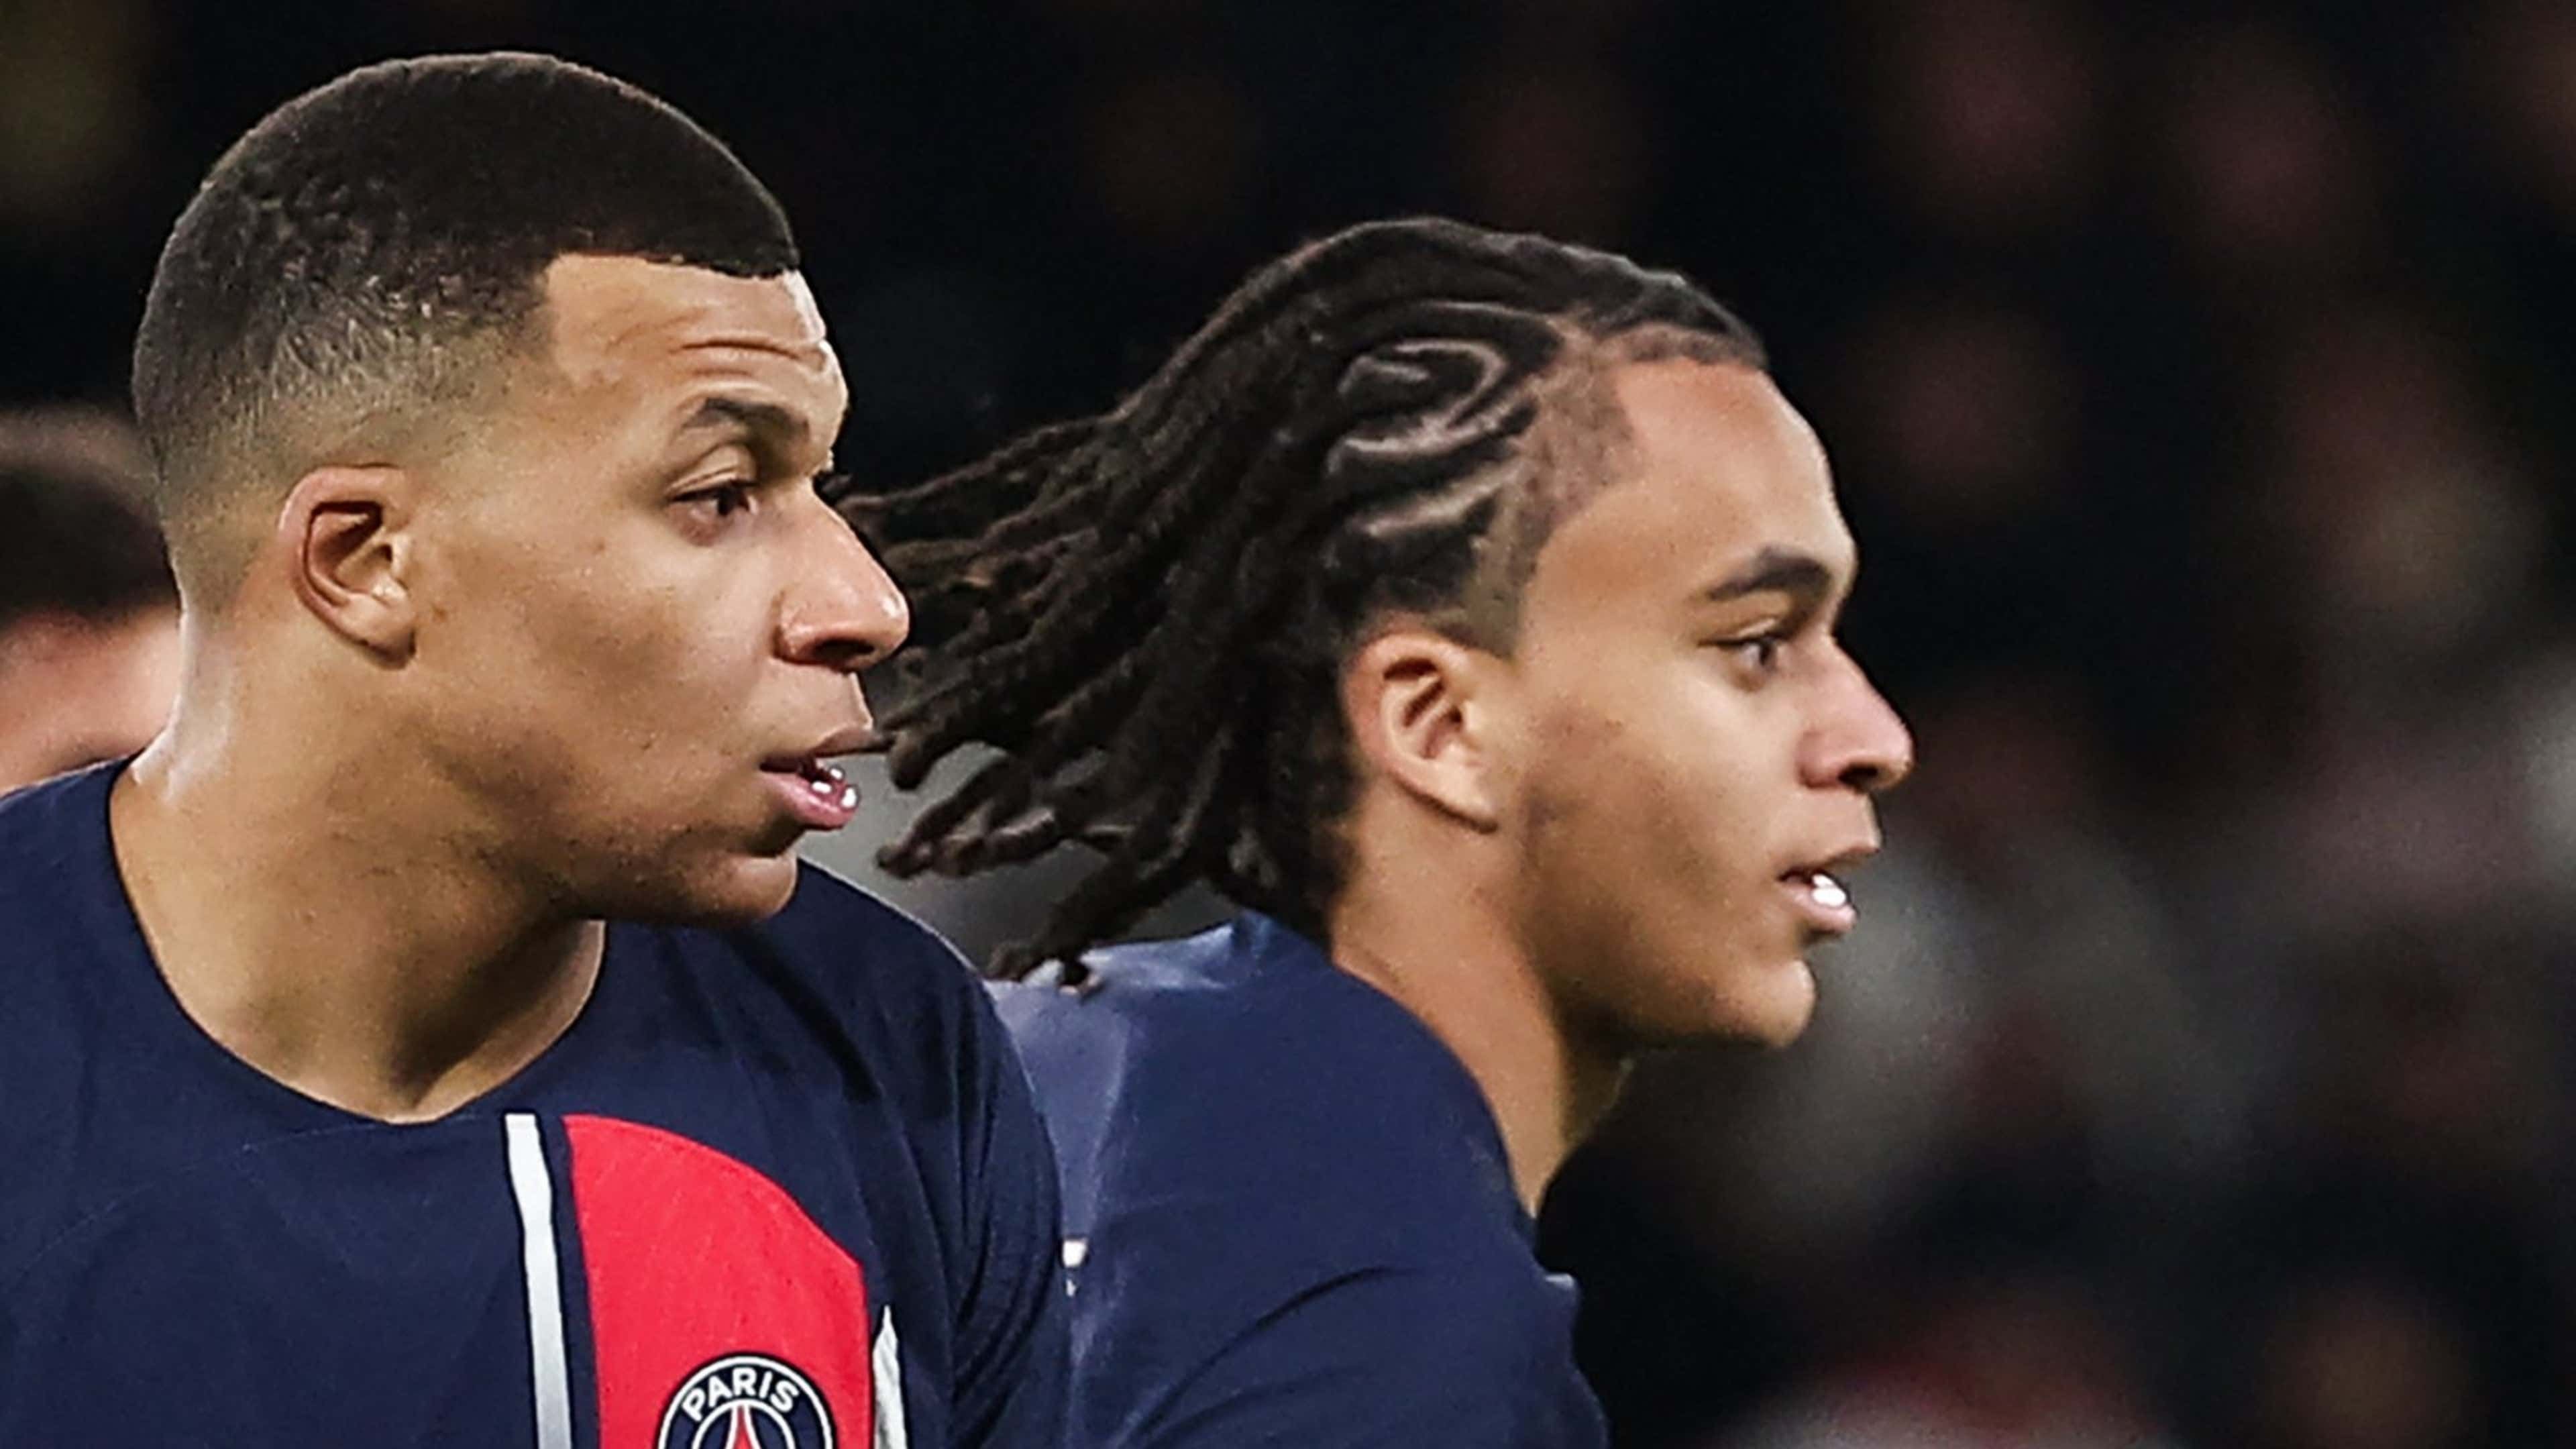 Junior Mbappe May Move To Real Madrid From PSG Following His Brother